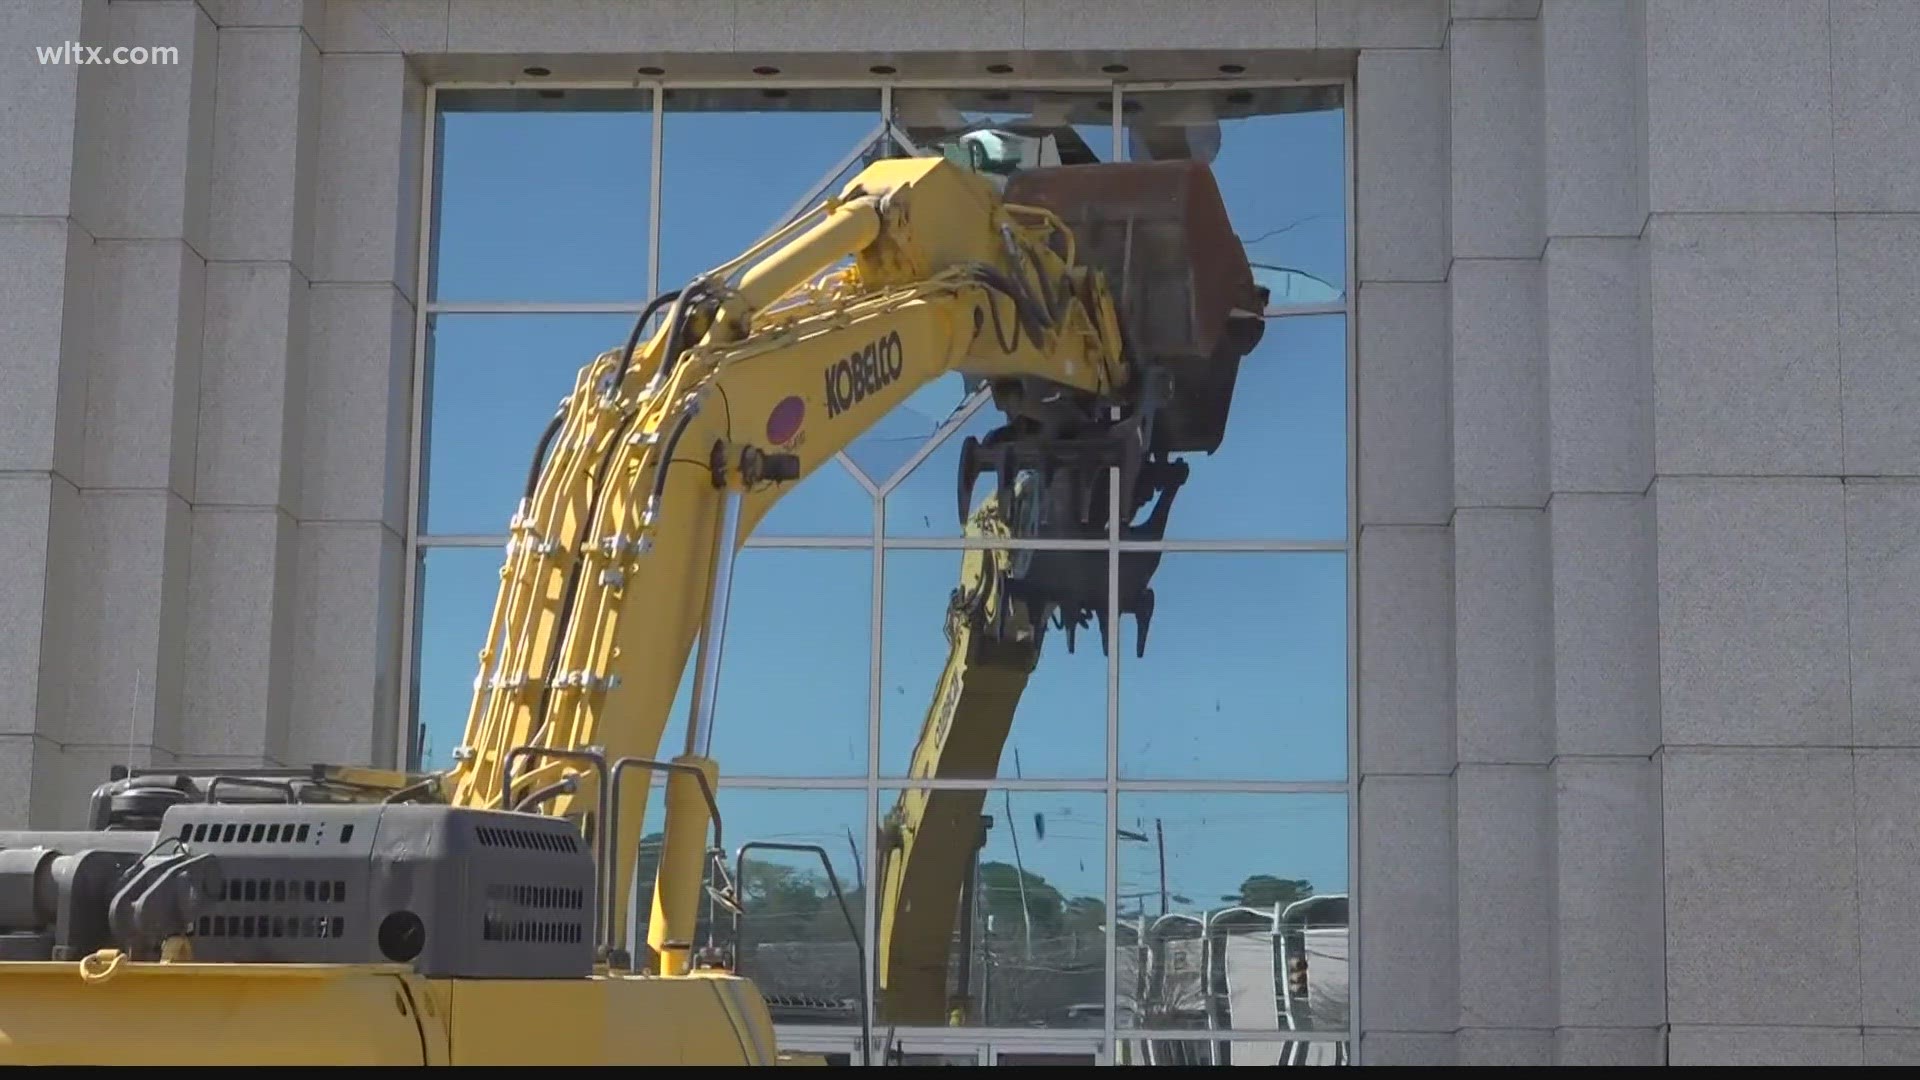 The demolition of the Richland Mall has begun, as crews clear the old buildings to make way for a massive new development.